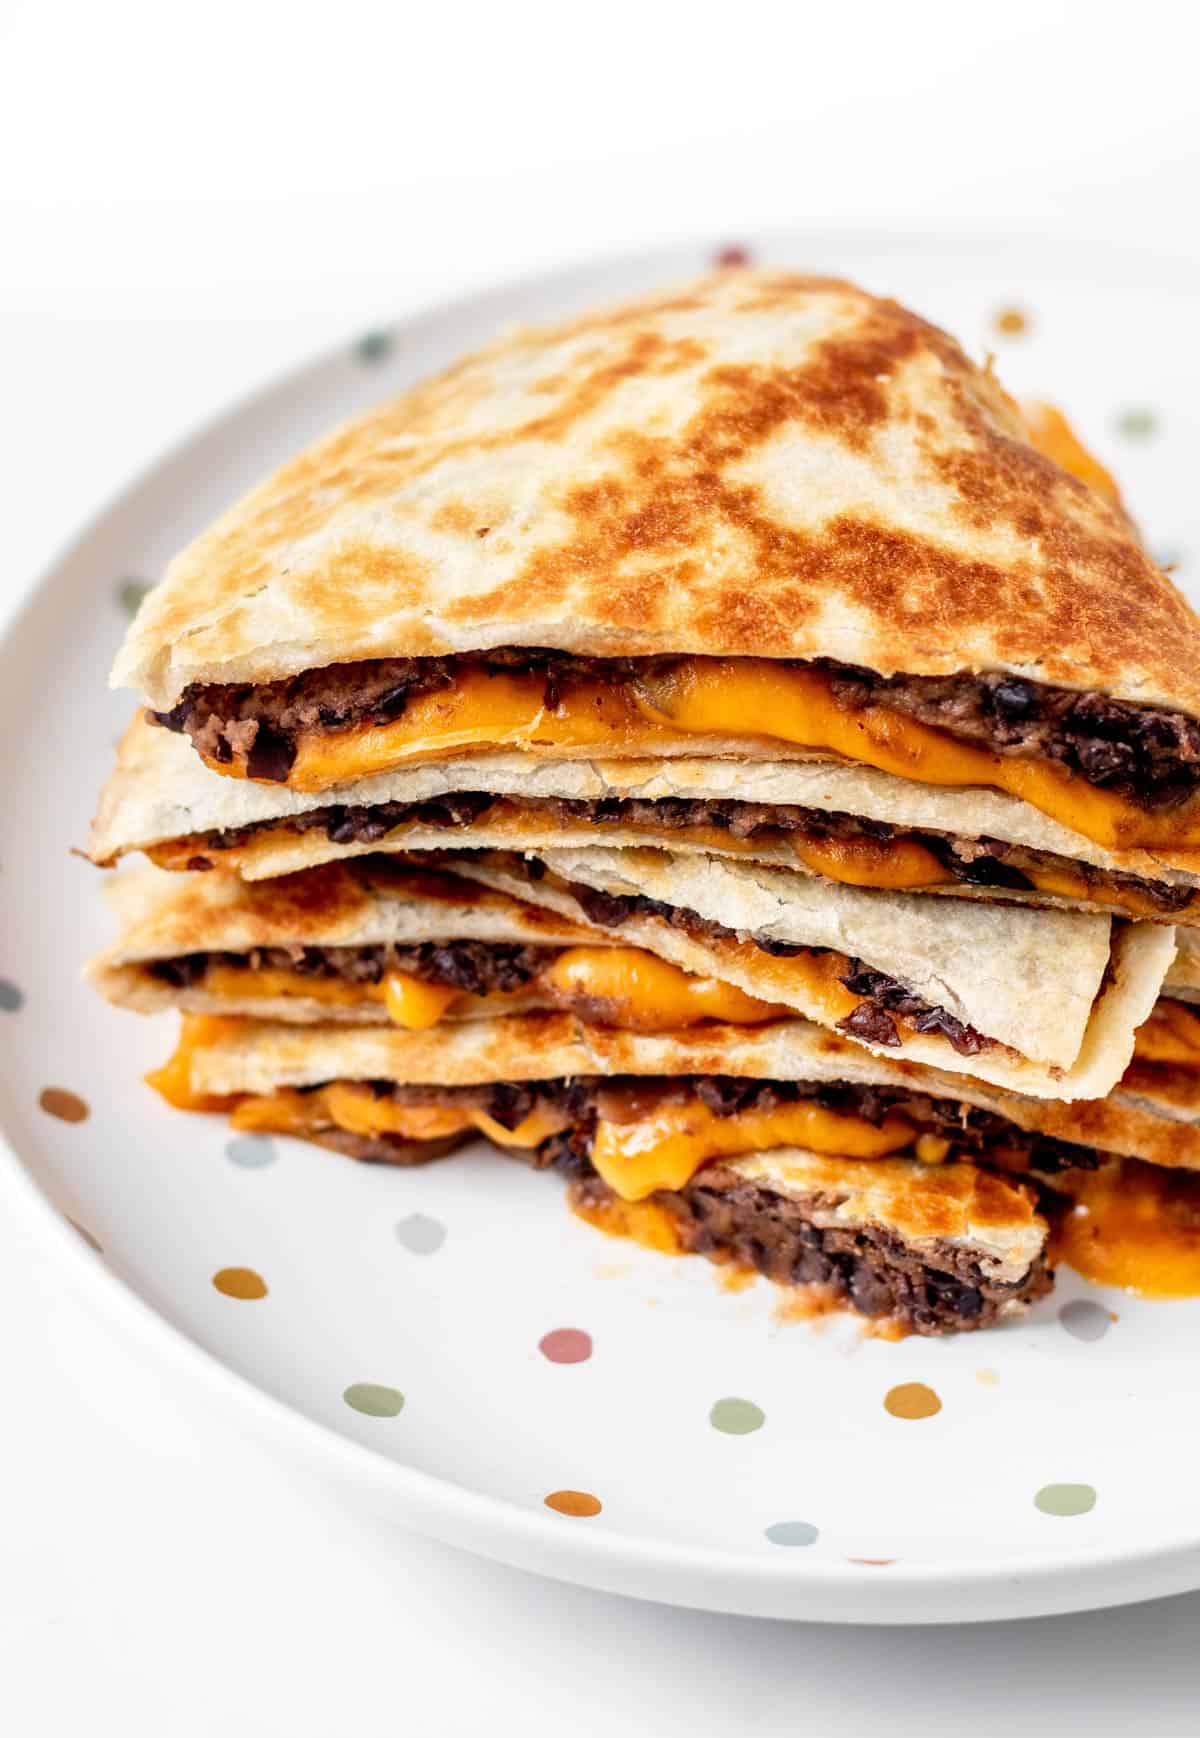 A stack of baby led weaning quesadillas on a polka dot plate.